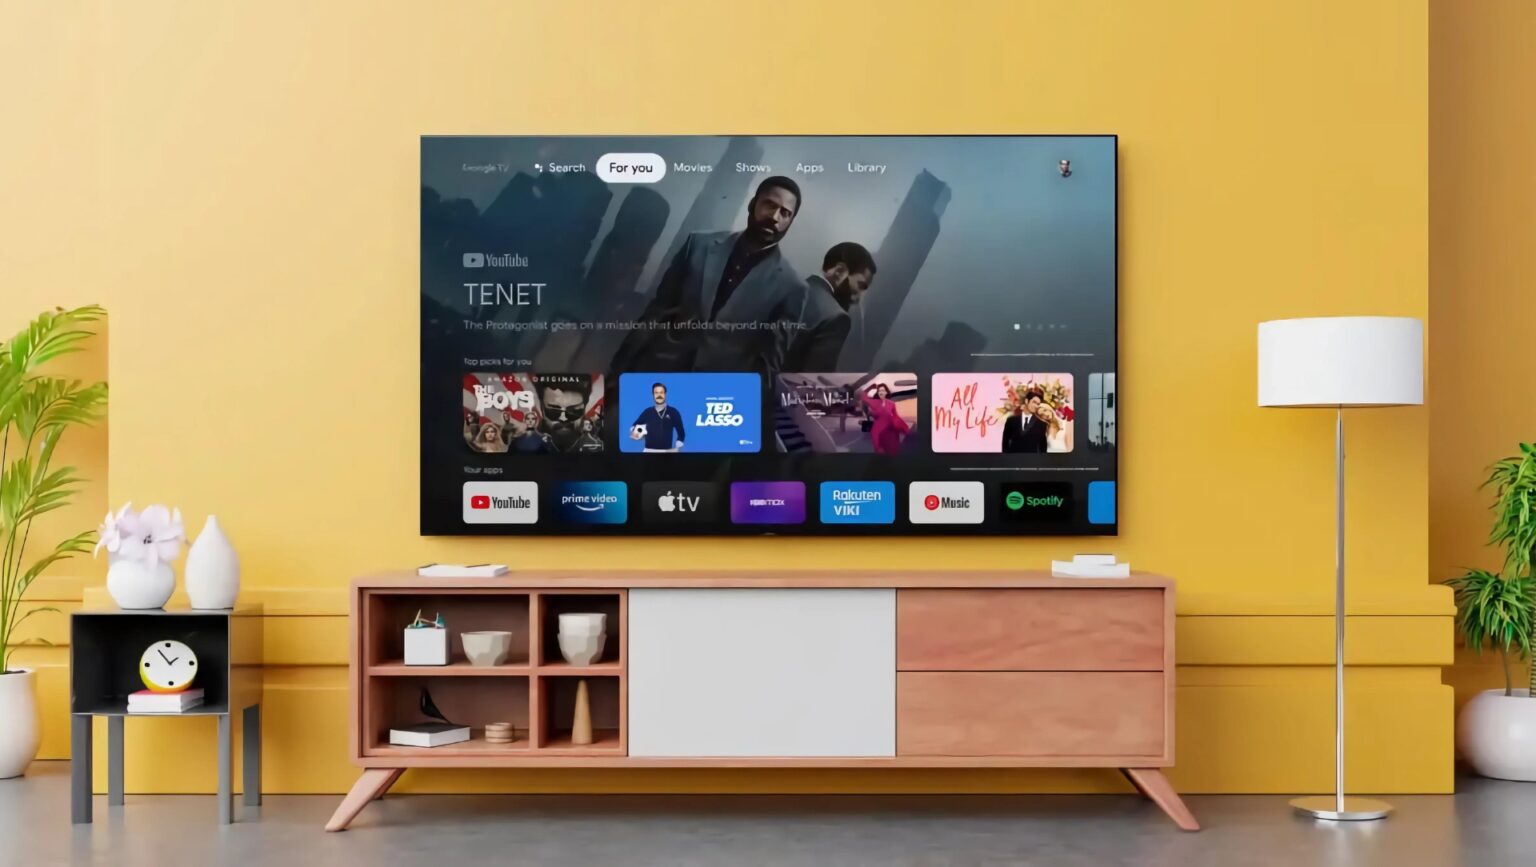 Google Android TV's New Shop Tab: Explore and Shop with Ease